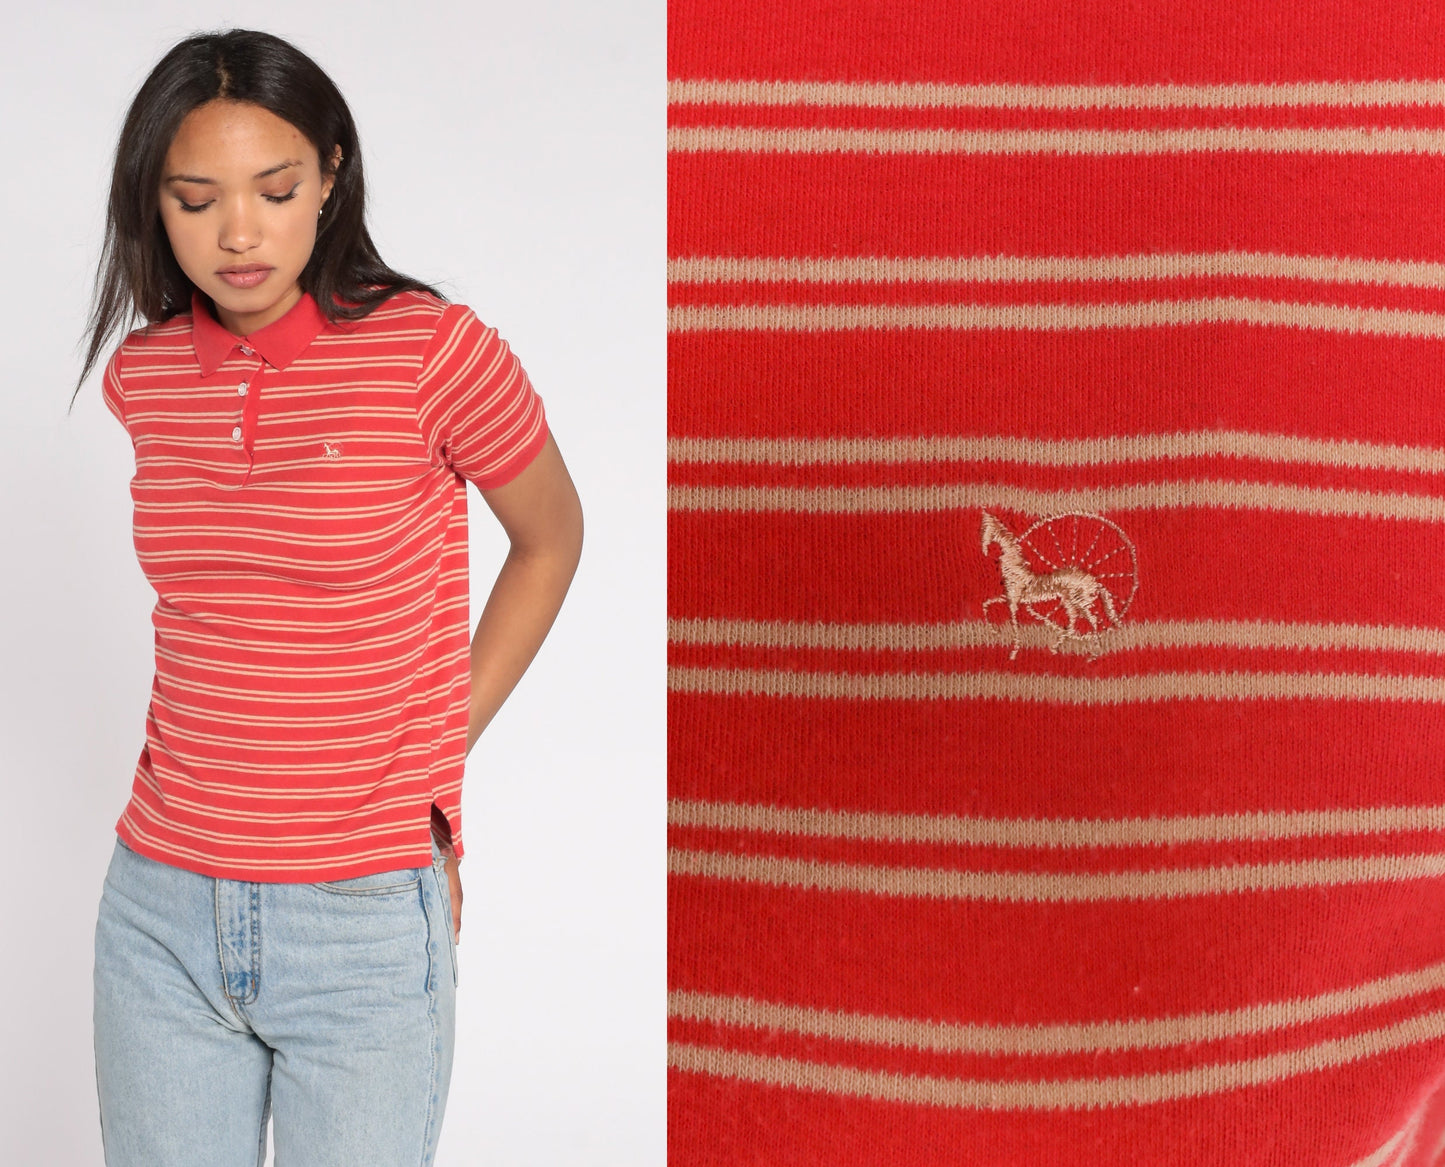 Striped Shirt Polo 80s 90s Red Horse Crest Collared T Shirt 1990s Normcore Collar Vintage Retro Half Button Up Shirt Preppy Tan Small S